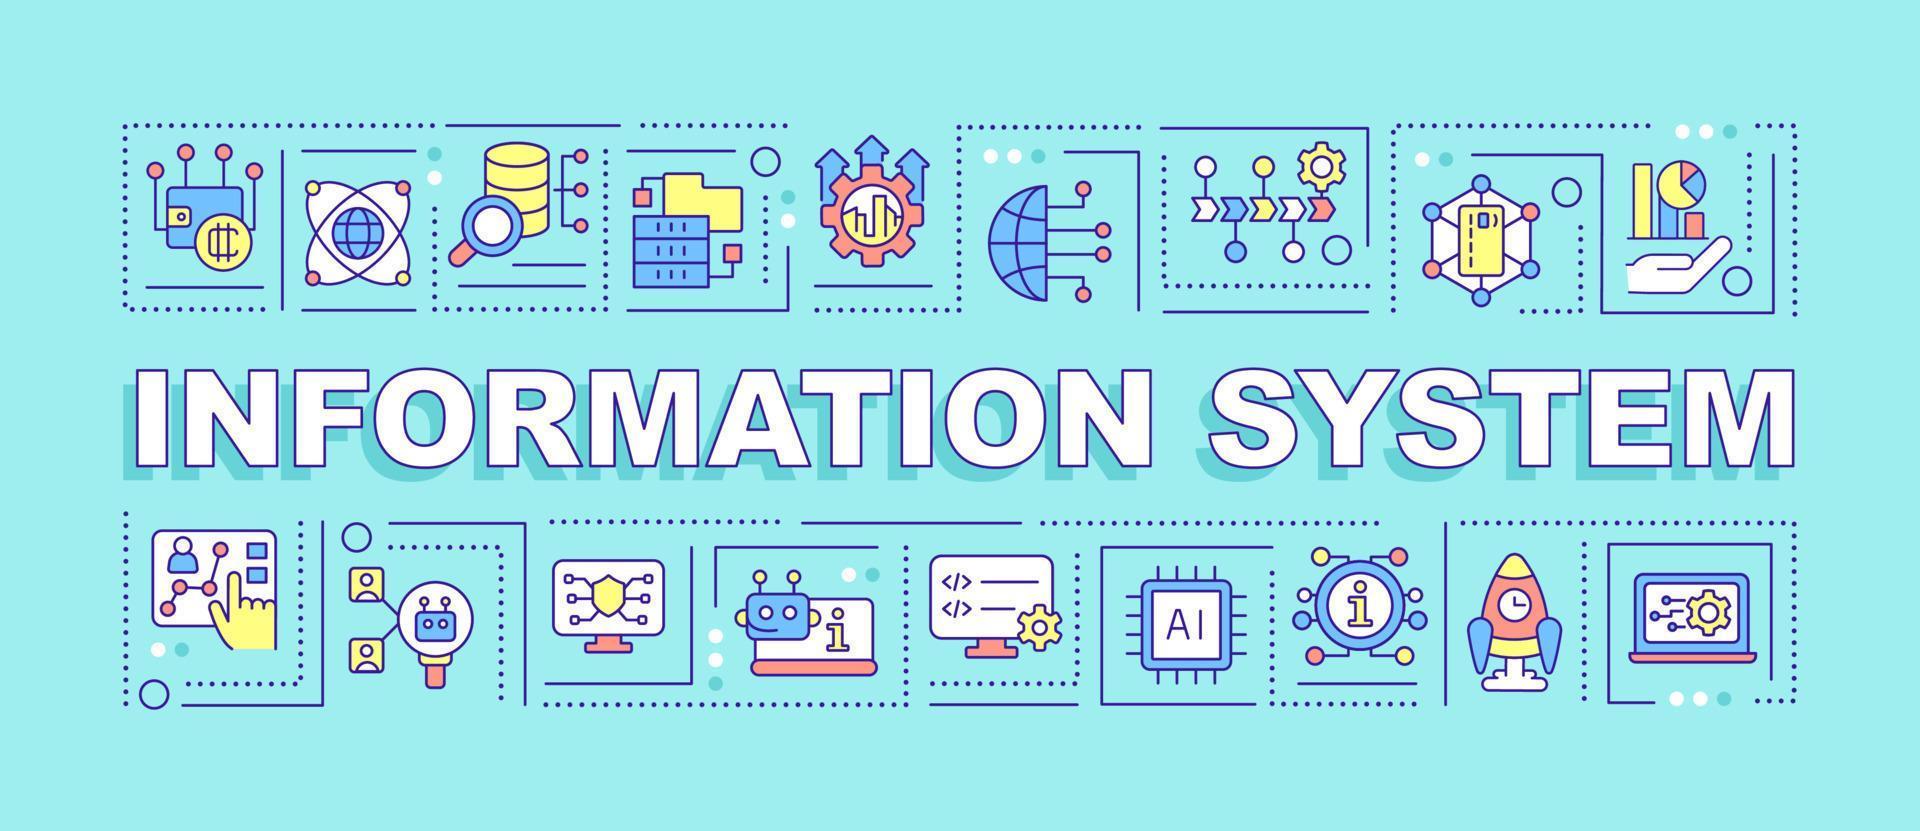 Information system word concepts turquoise banner. Computer-based data. Infographics with icons on color background. Isolated typography. Vector illustration with text.